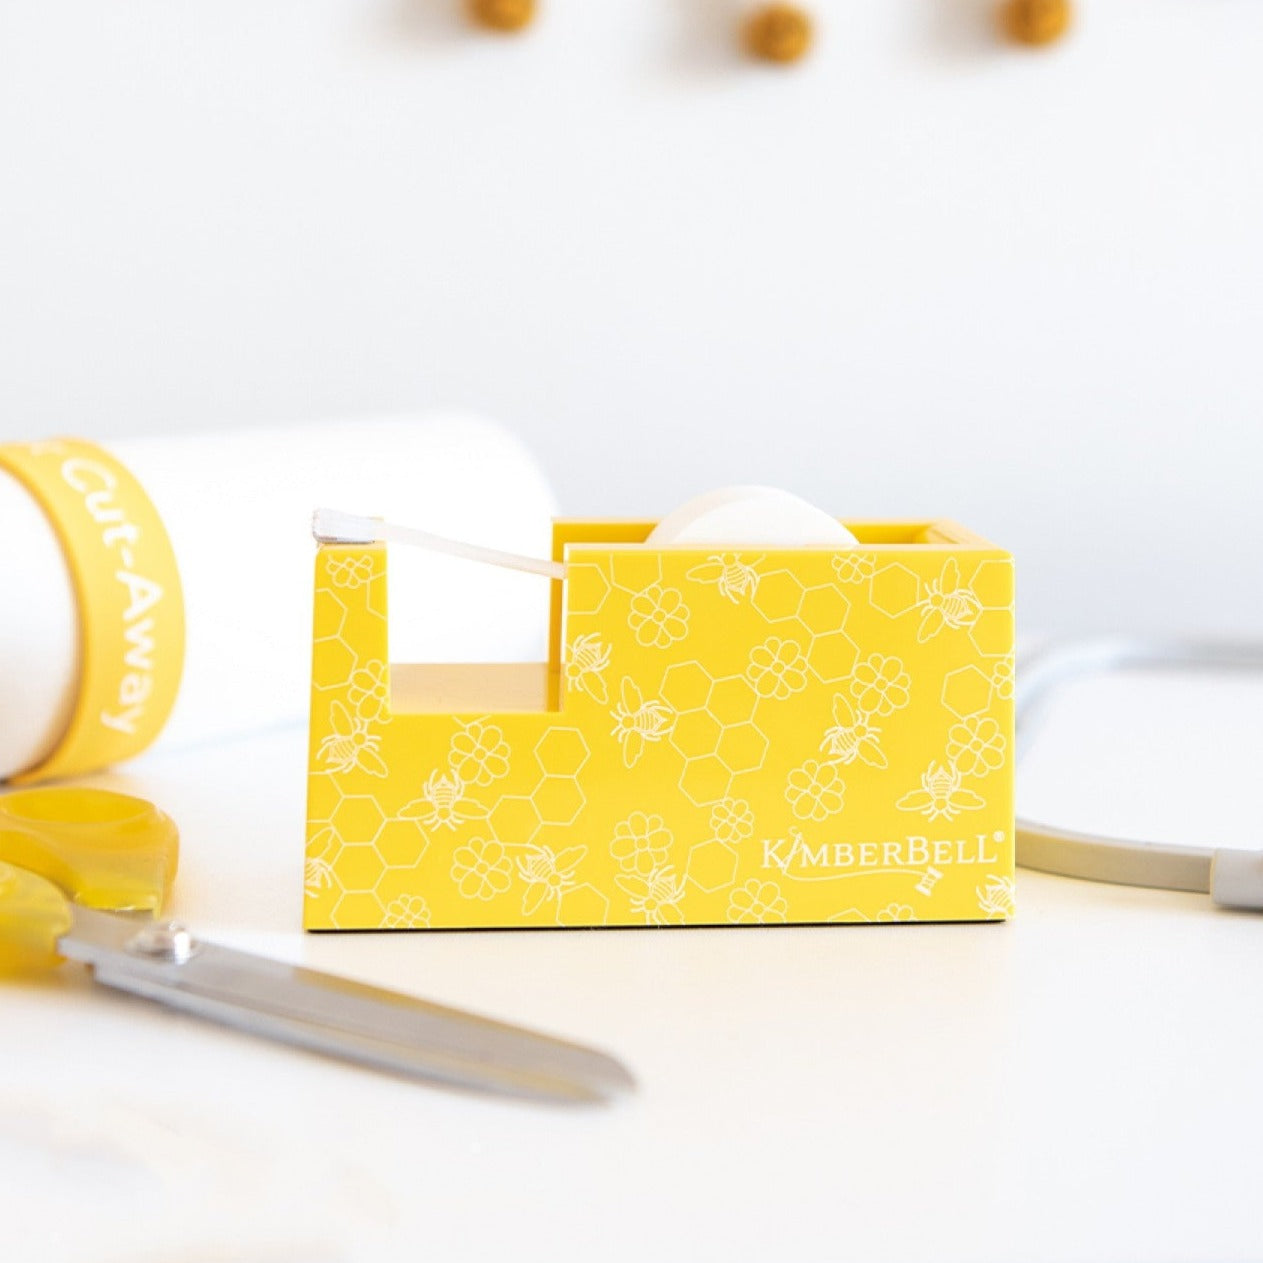 Kimberbell Paper Tape Dispenser - Yellow Bees, Notions